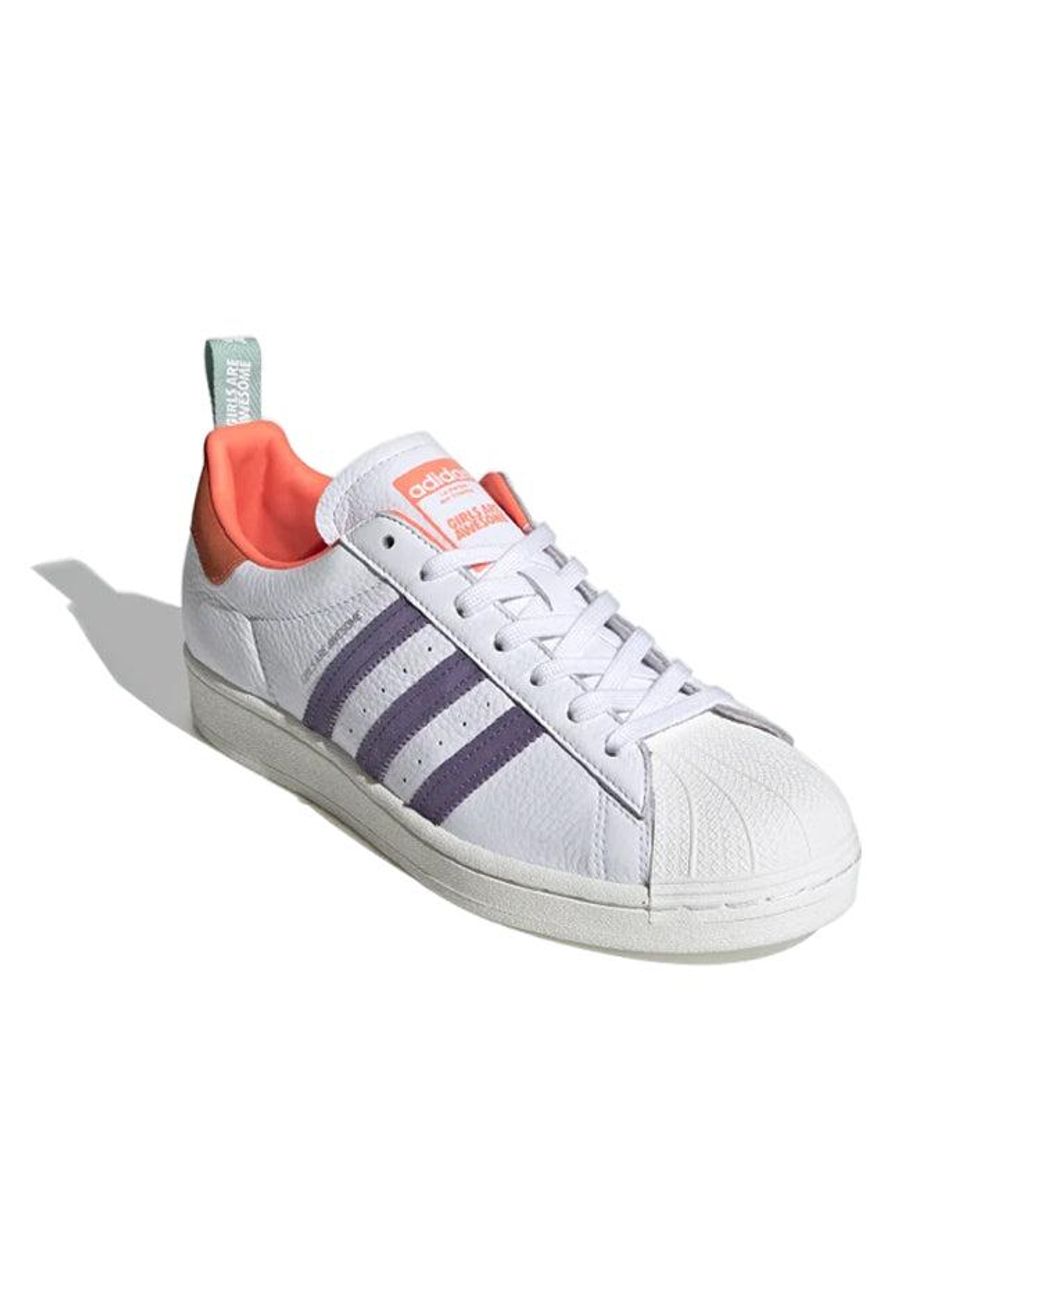 Adidas x Girls Are Awesome Superstars